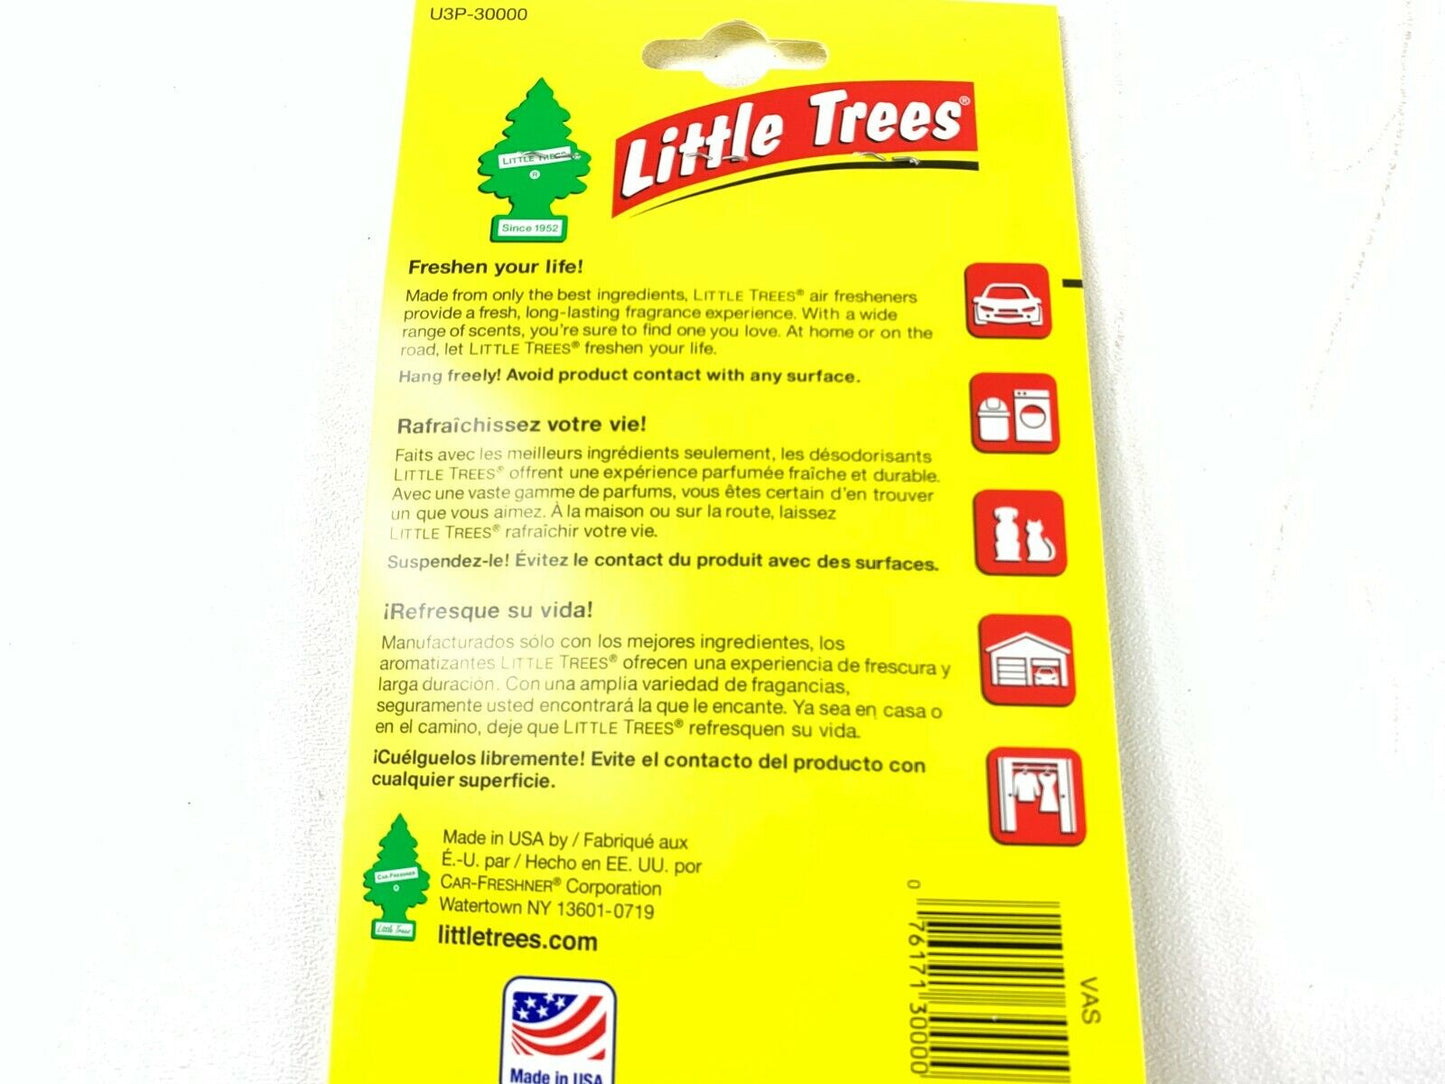 Lot of 13 Little Trees Car Air Fresheners - Tree Shaped Assorted Scents